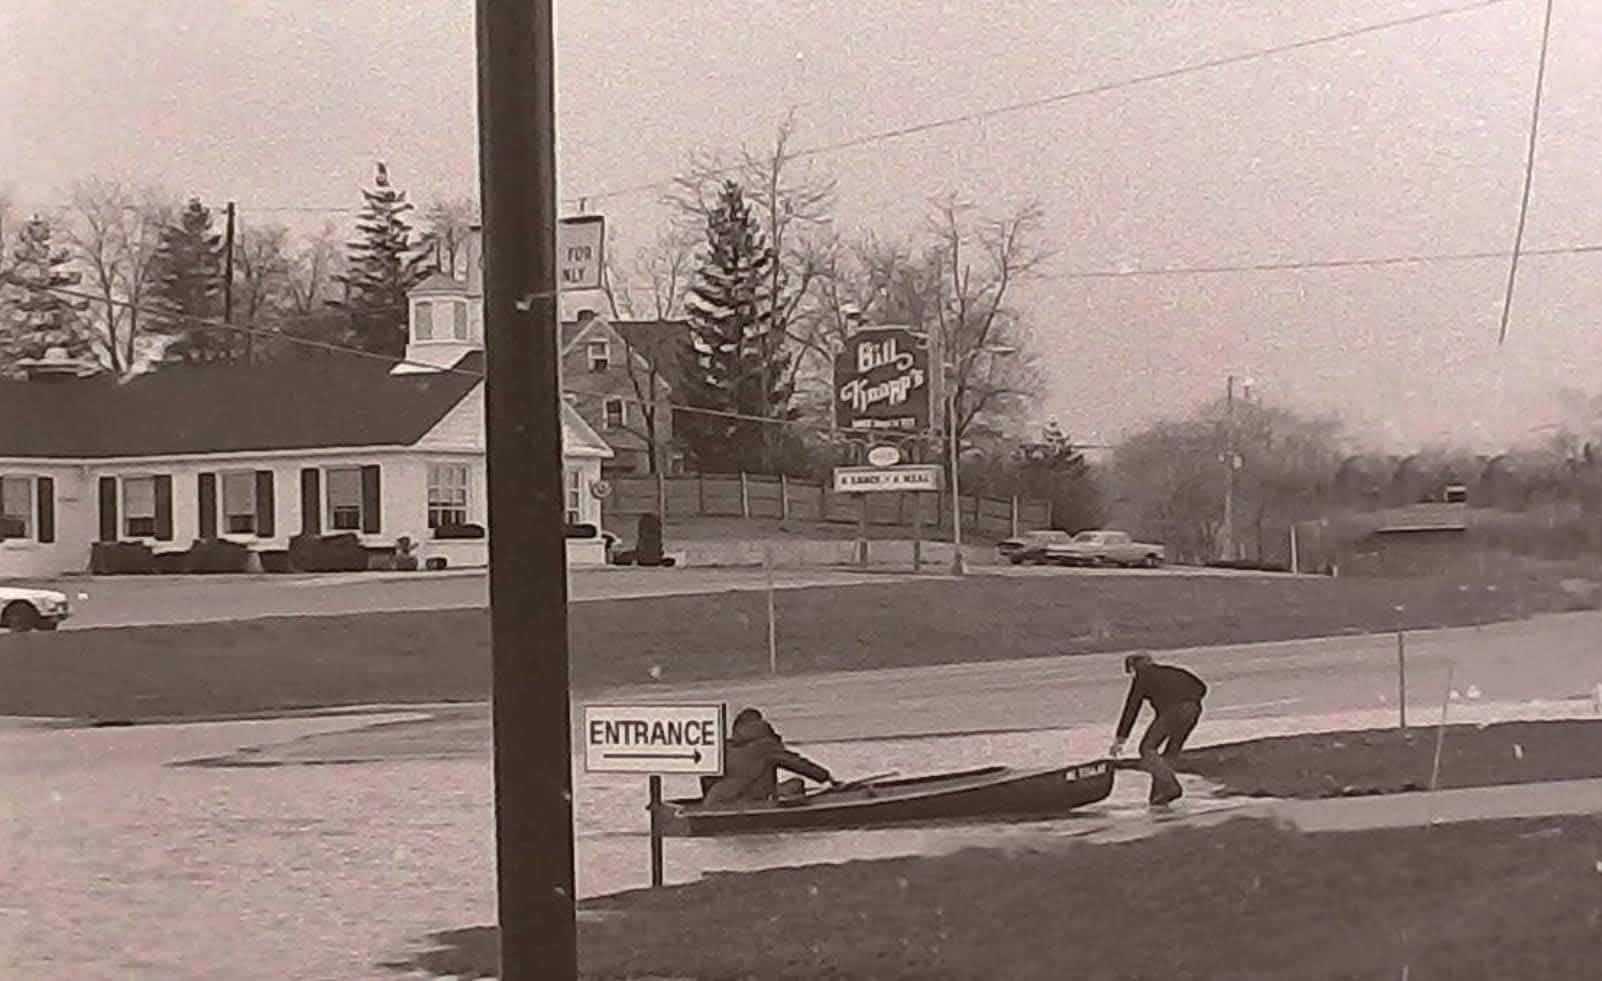 Okemos Flood of 1975 - Okemos Rd and Grand River Ave 6